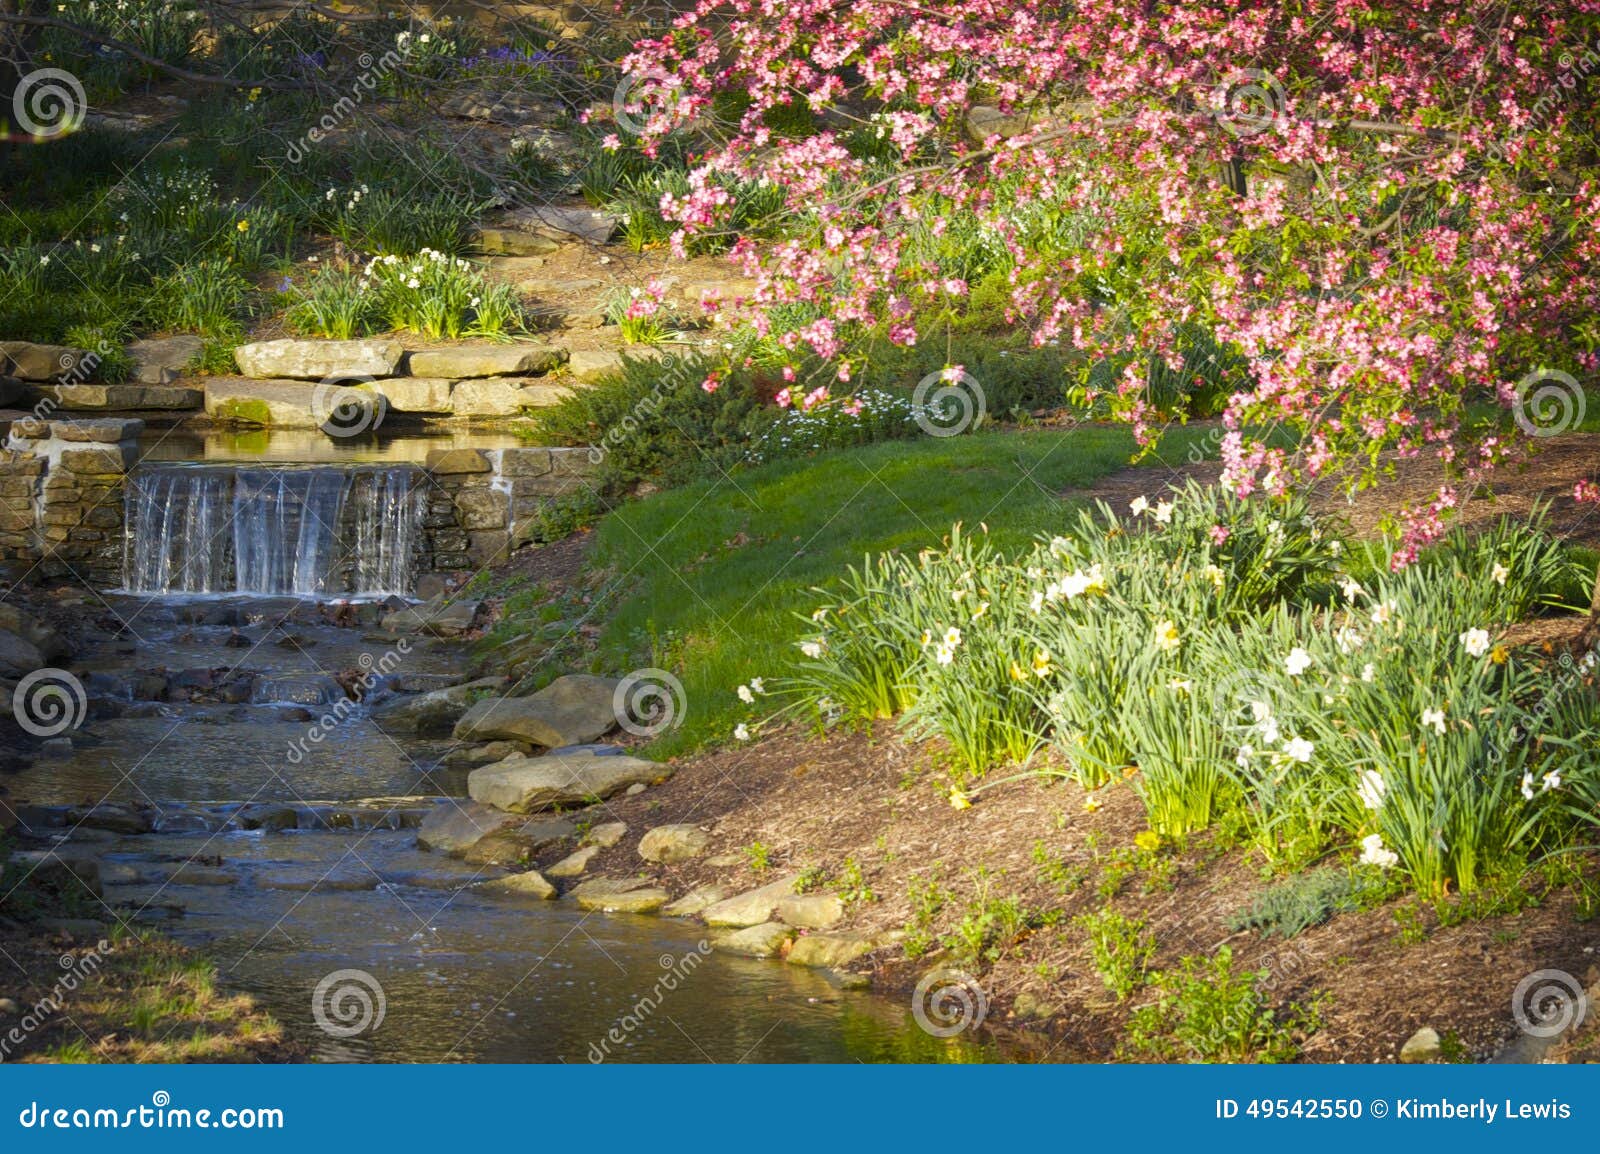 a gentle waterfall going into a stream with pink spring flowers.